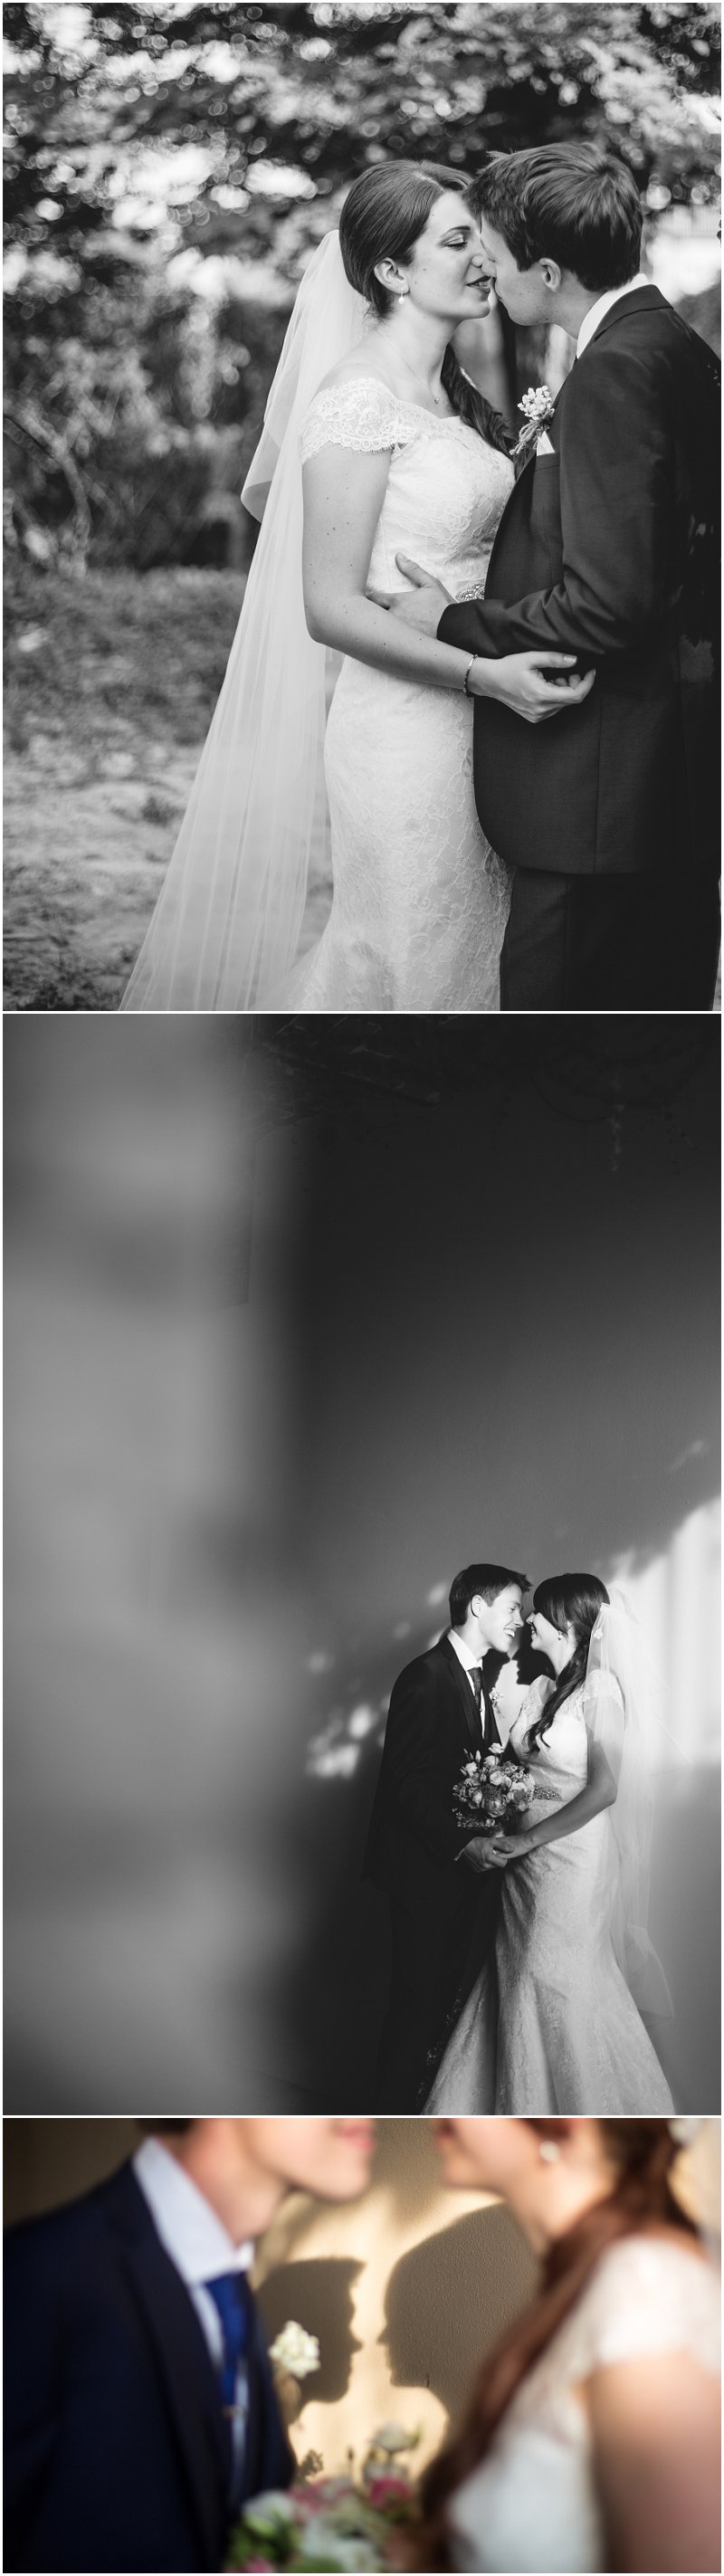 Black and white bride and groom portraits Italy